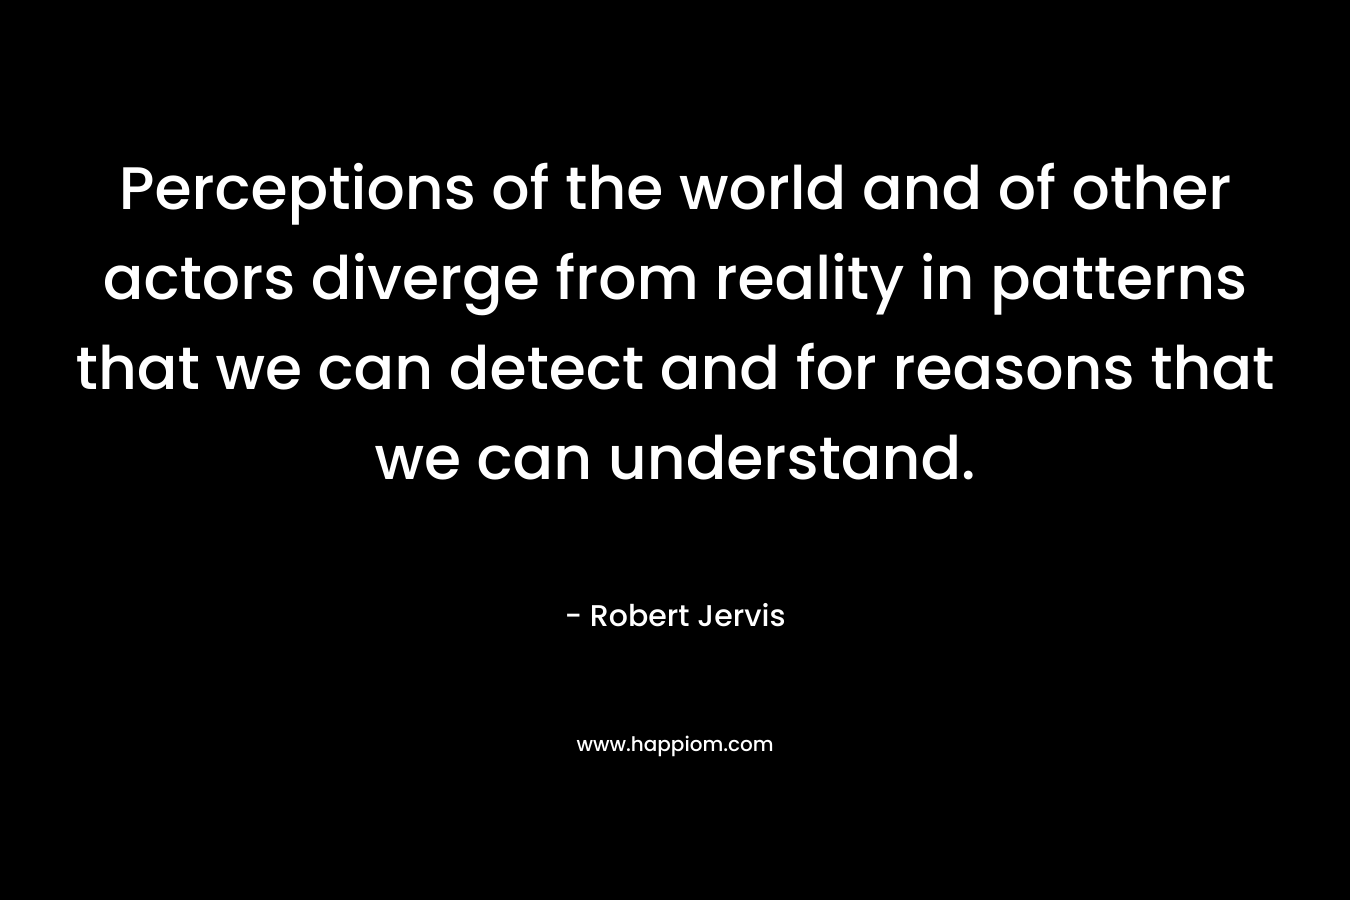 Perceptions of the world and of other actors diverge from reality in patterns that we can detect and for reasons that we can understand.